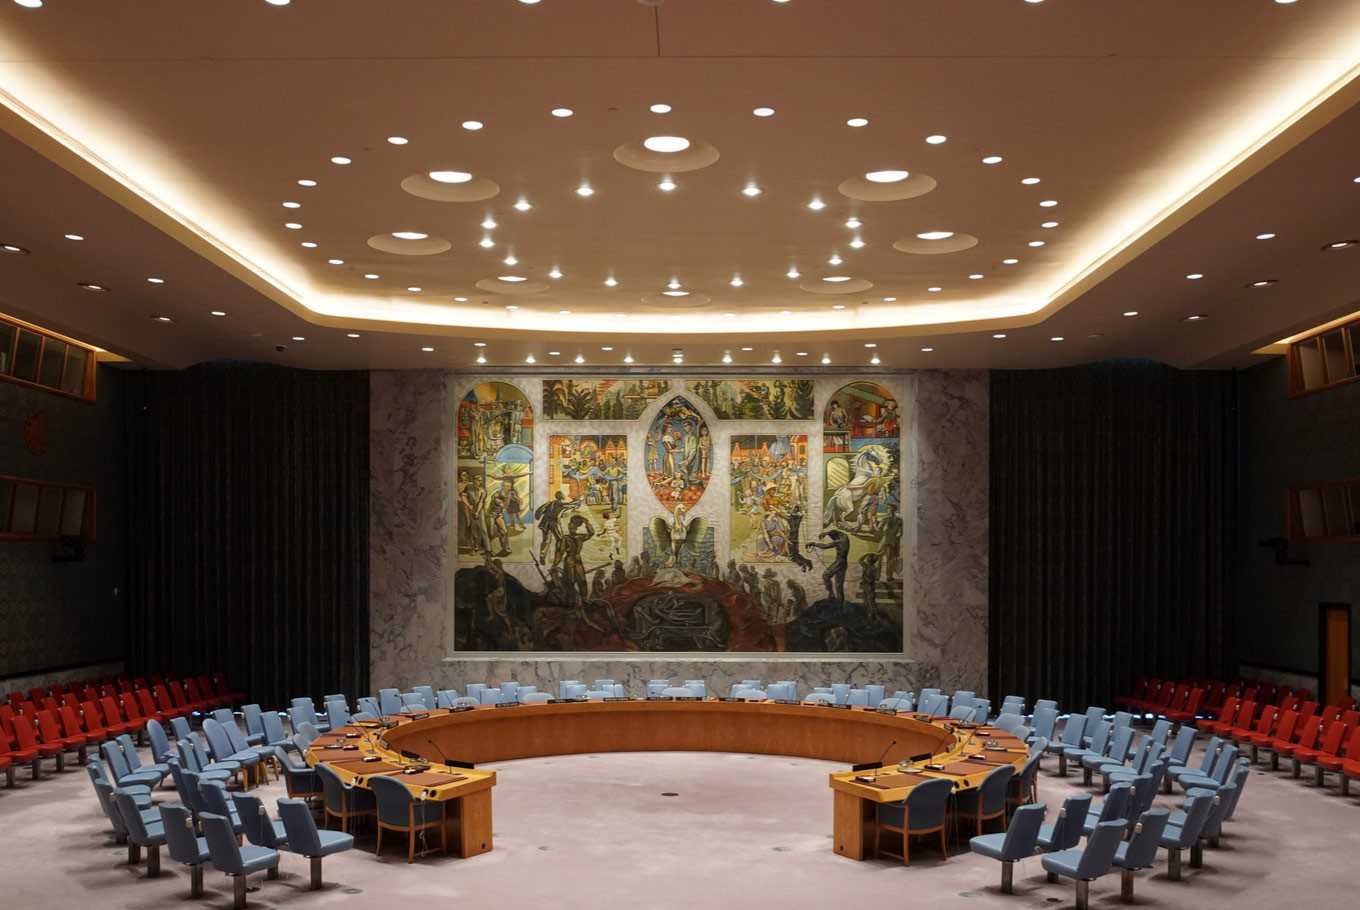 Seven nations vying for five UN Security Council seats